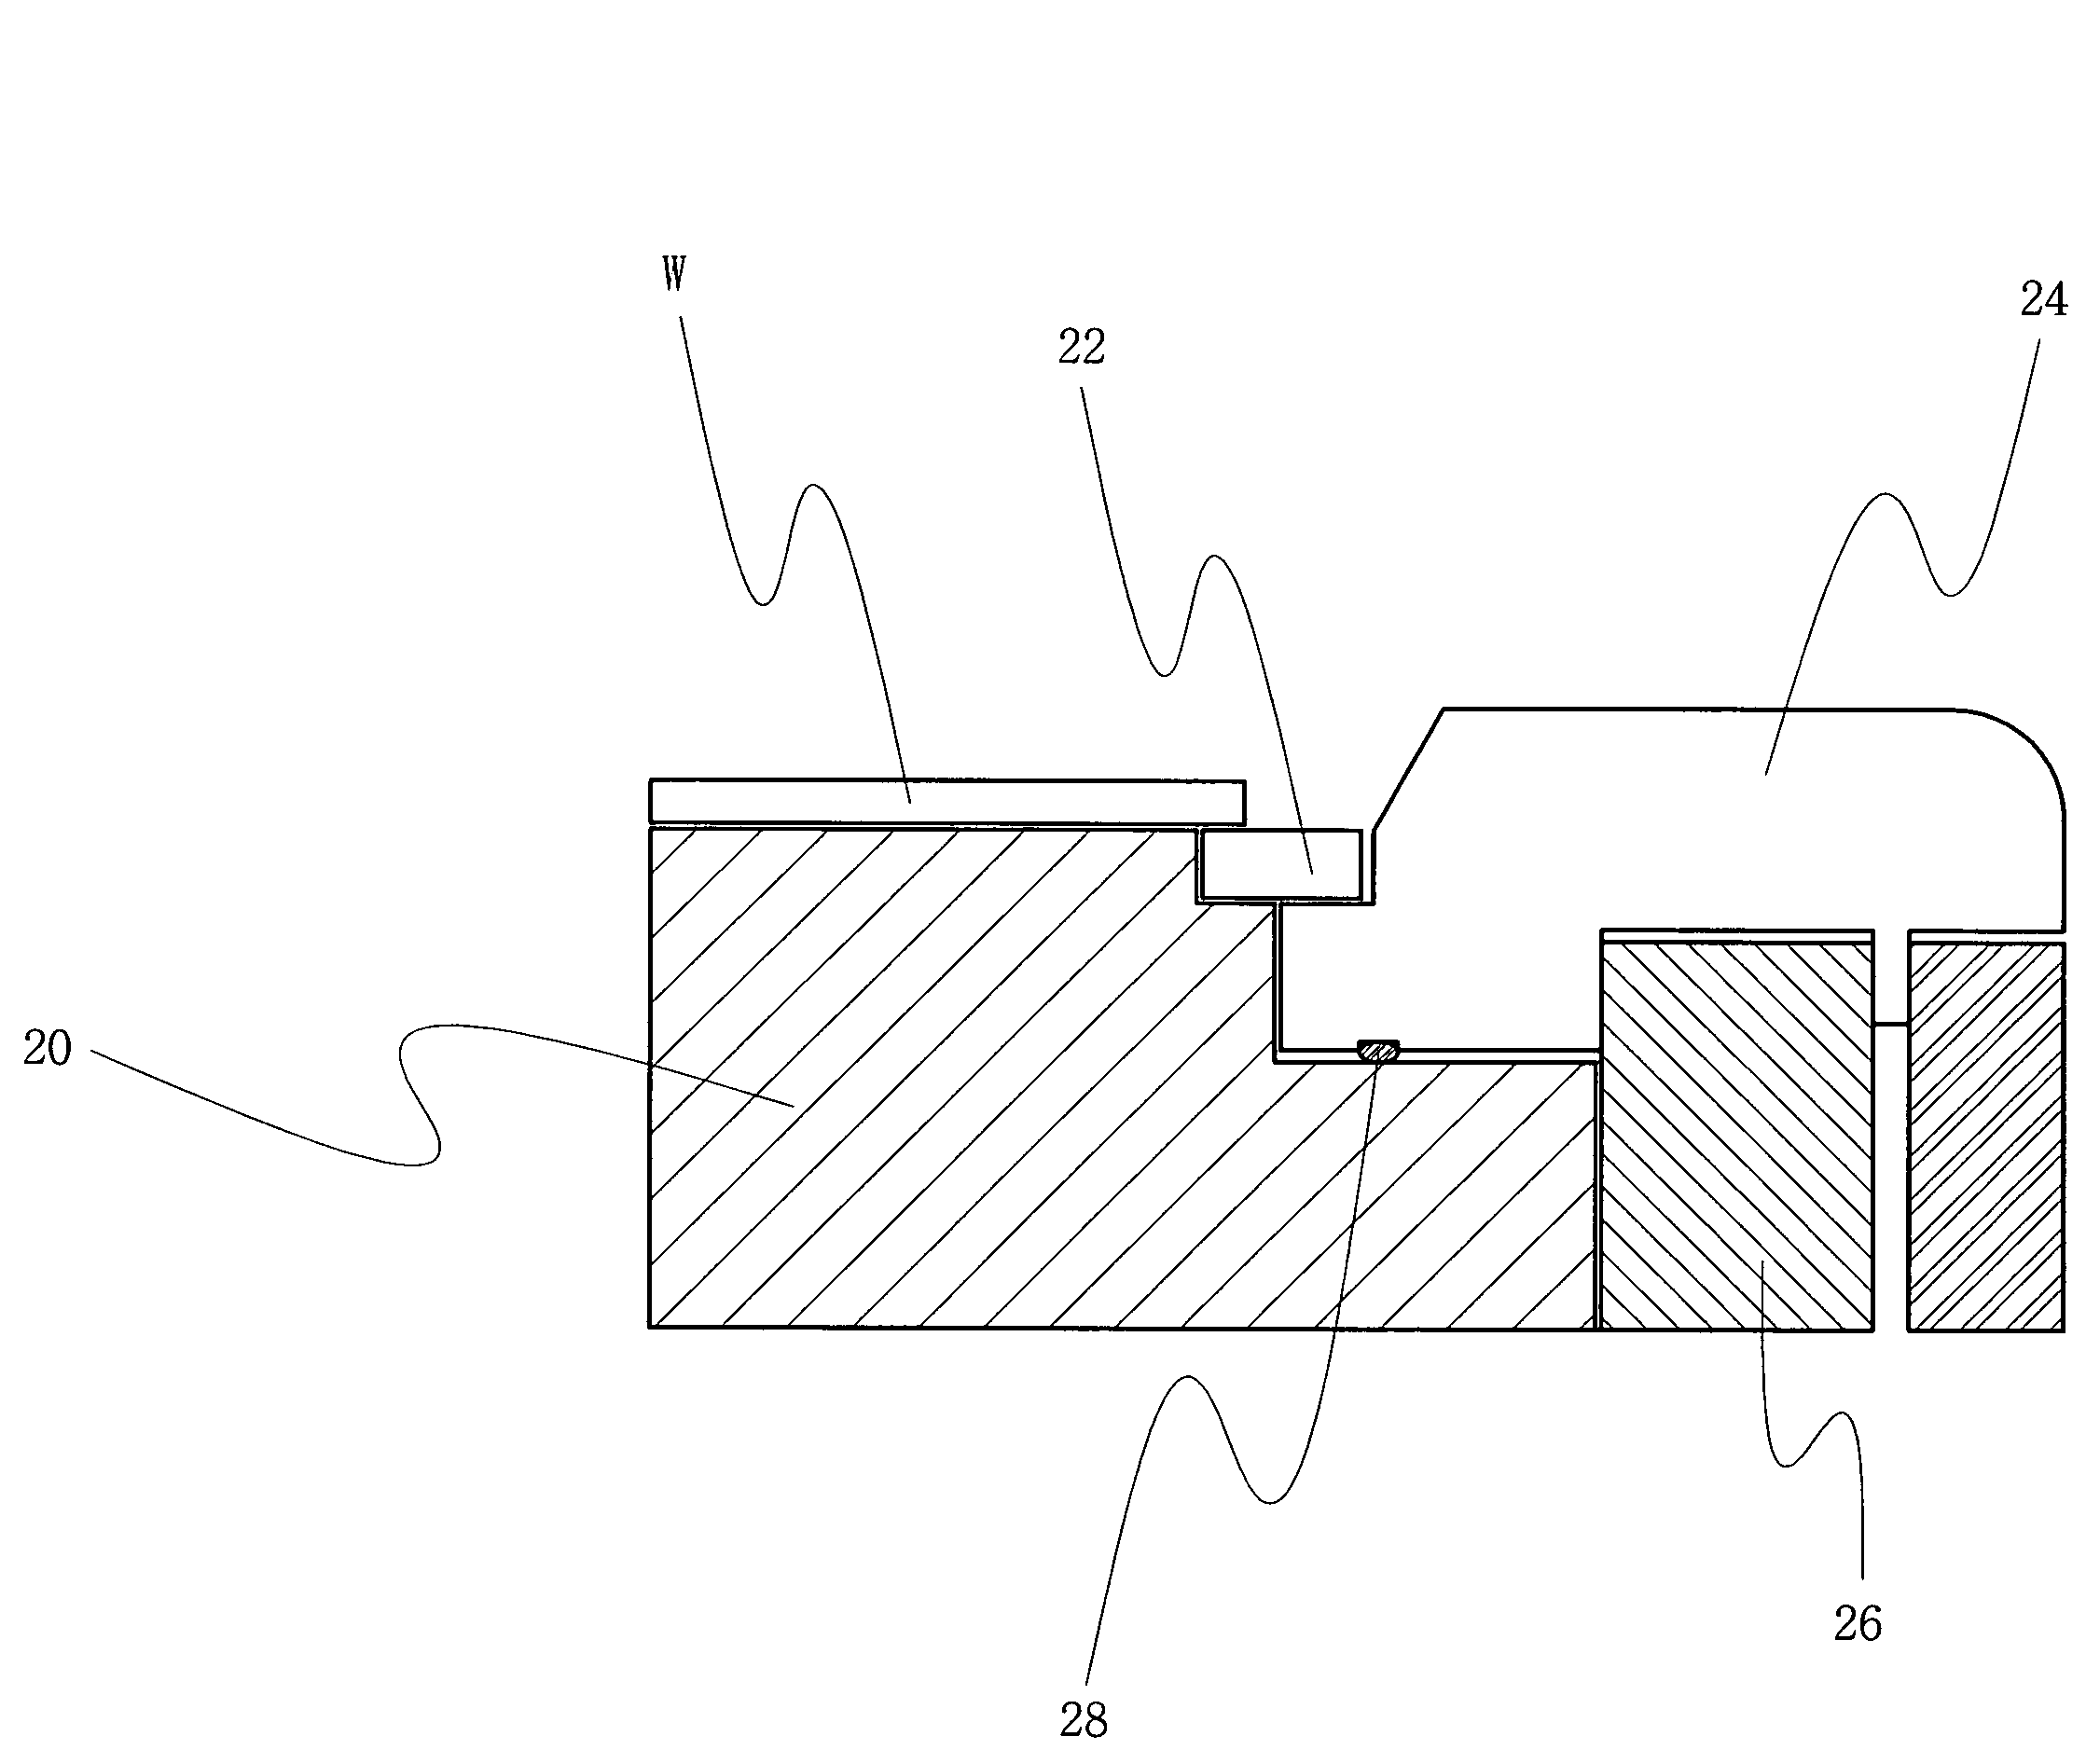 Semiconductor etching apparatus